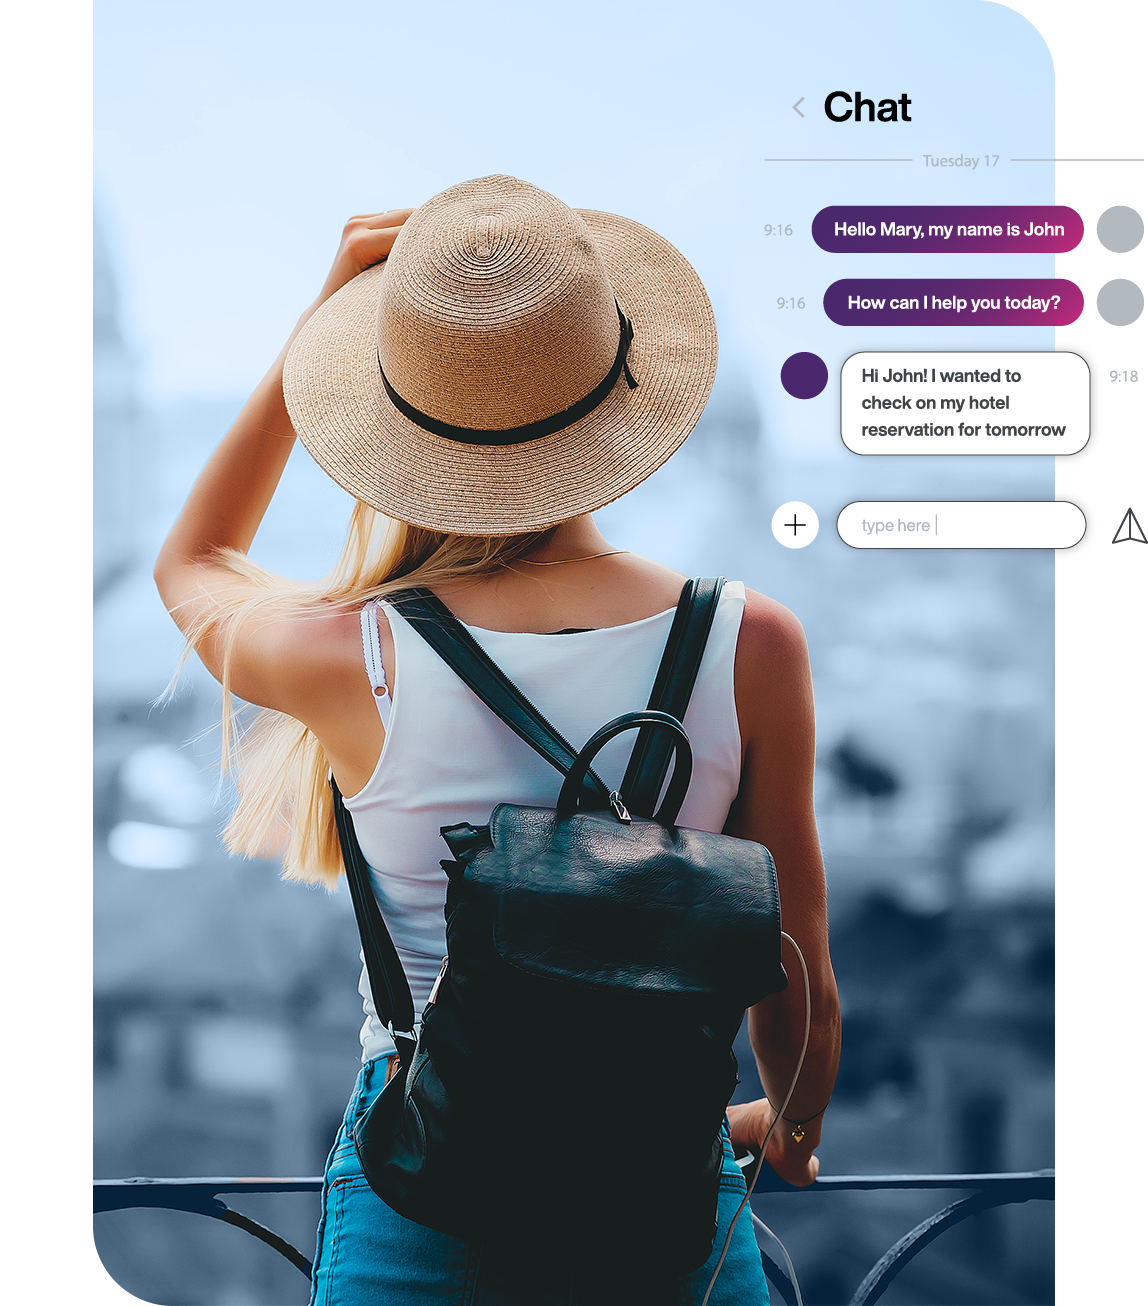 A woman wearing a hat looking over a balcony at a view with a chatbot conversation discussing a hotel reservation overlaid. 